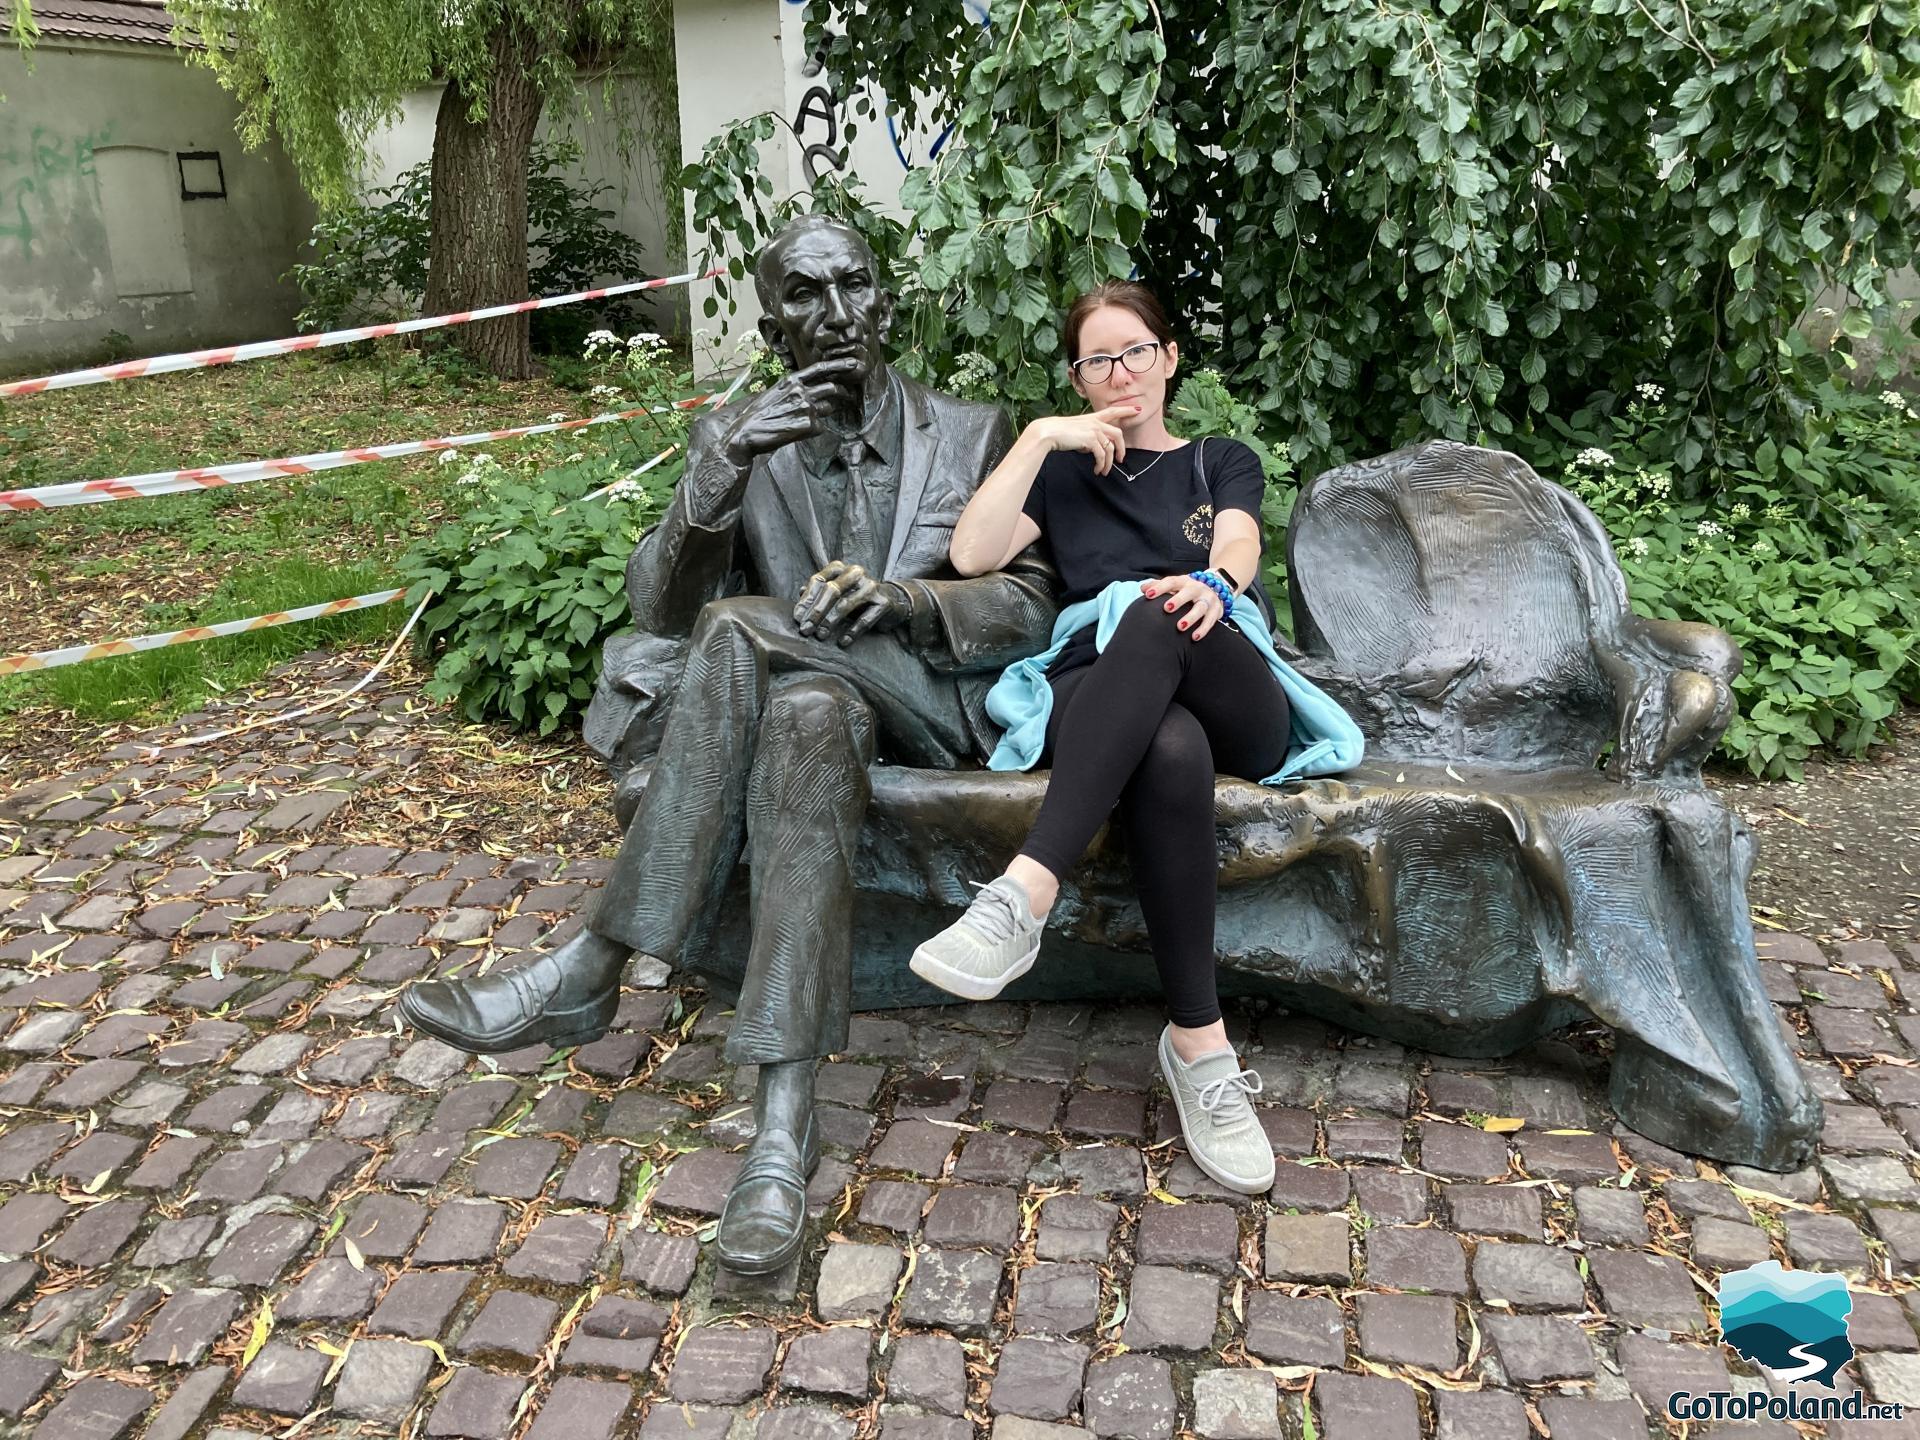 a woman is sitting on a bench which is a fragment of sculpture joined with a sculptured man